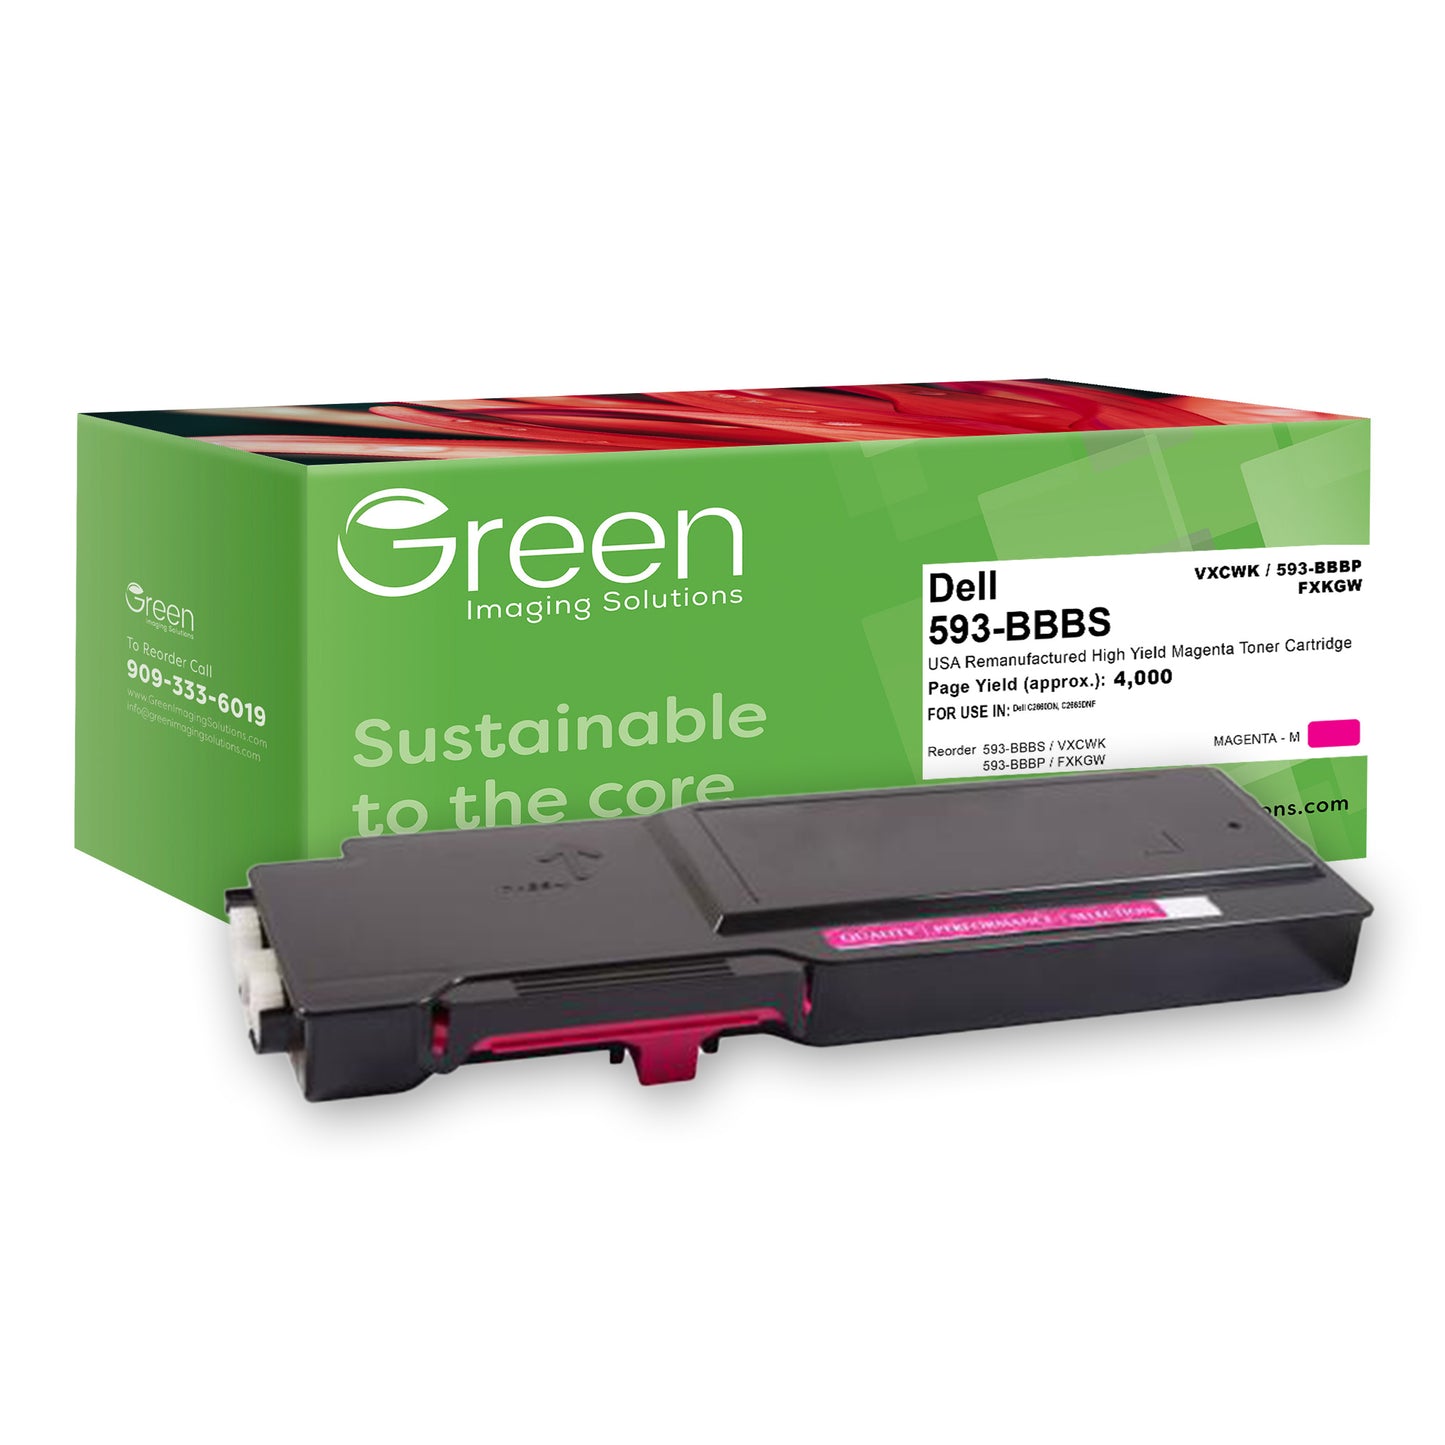 Green Imaging Solutions USA Remanufactured High Yield Magenta Toner Cartridge for Dell C2660